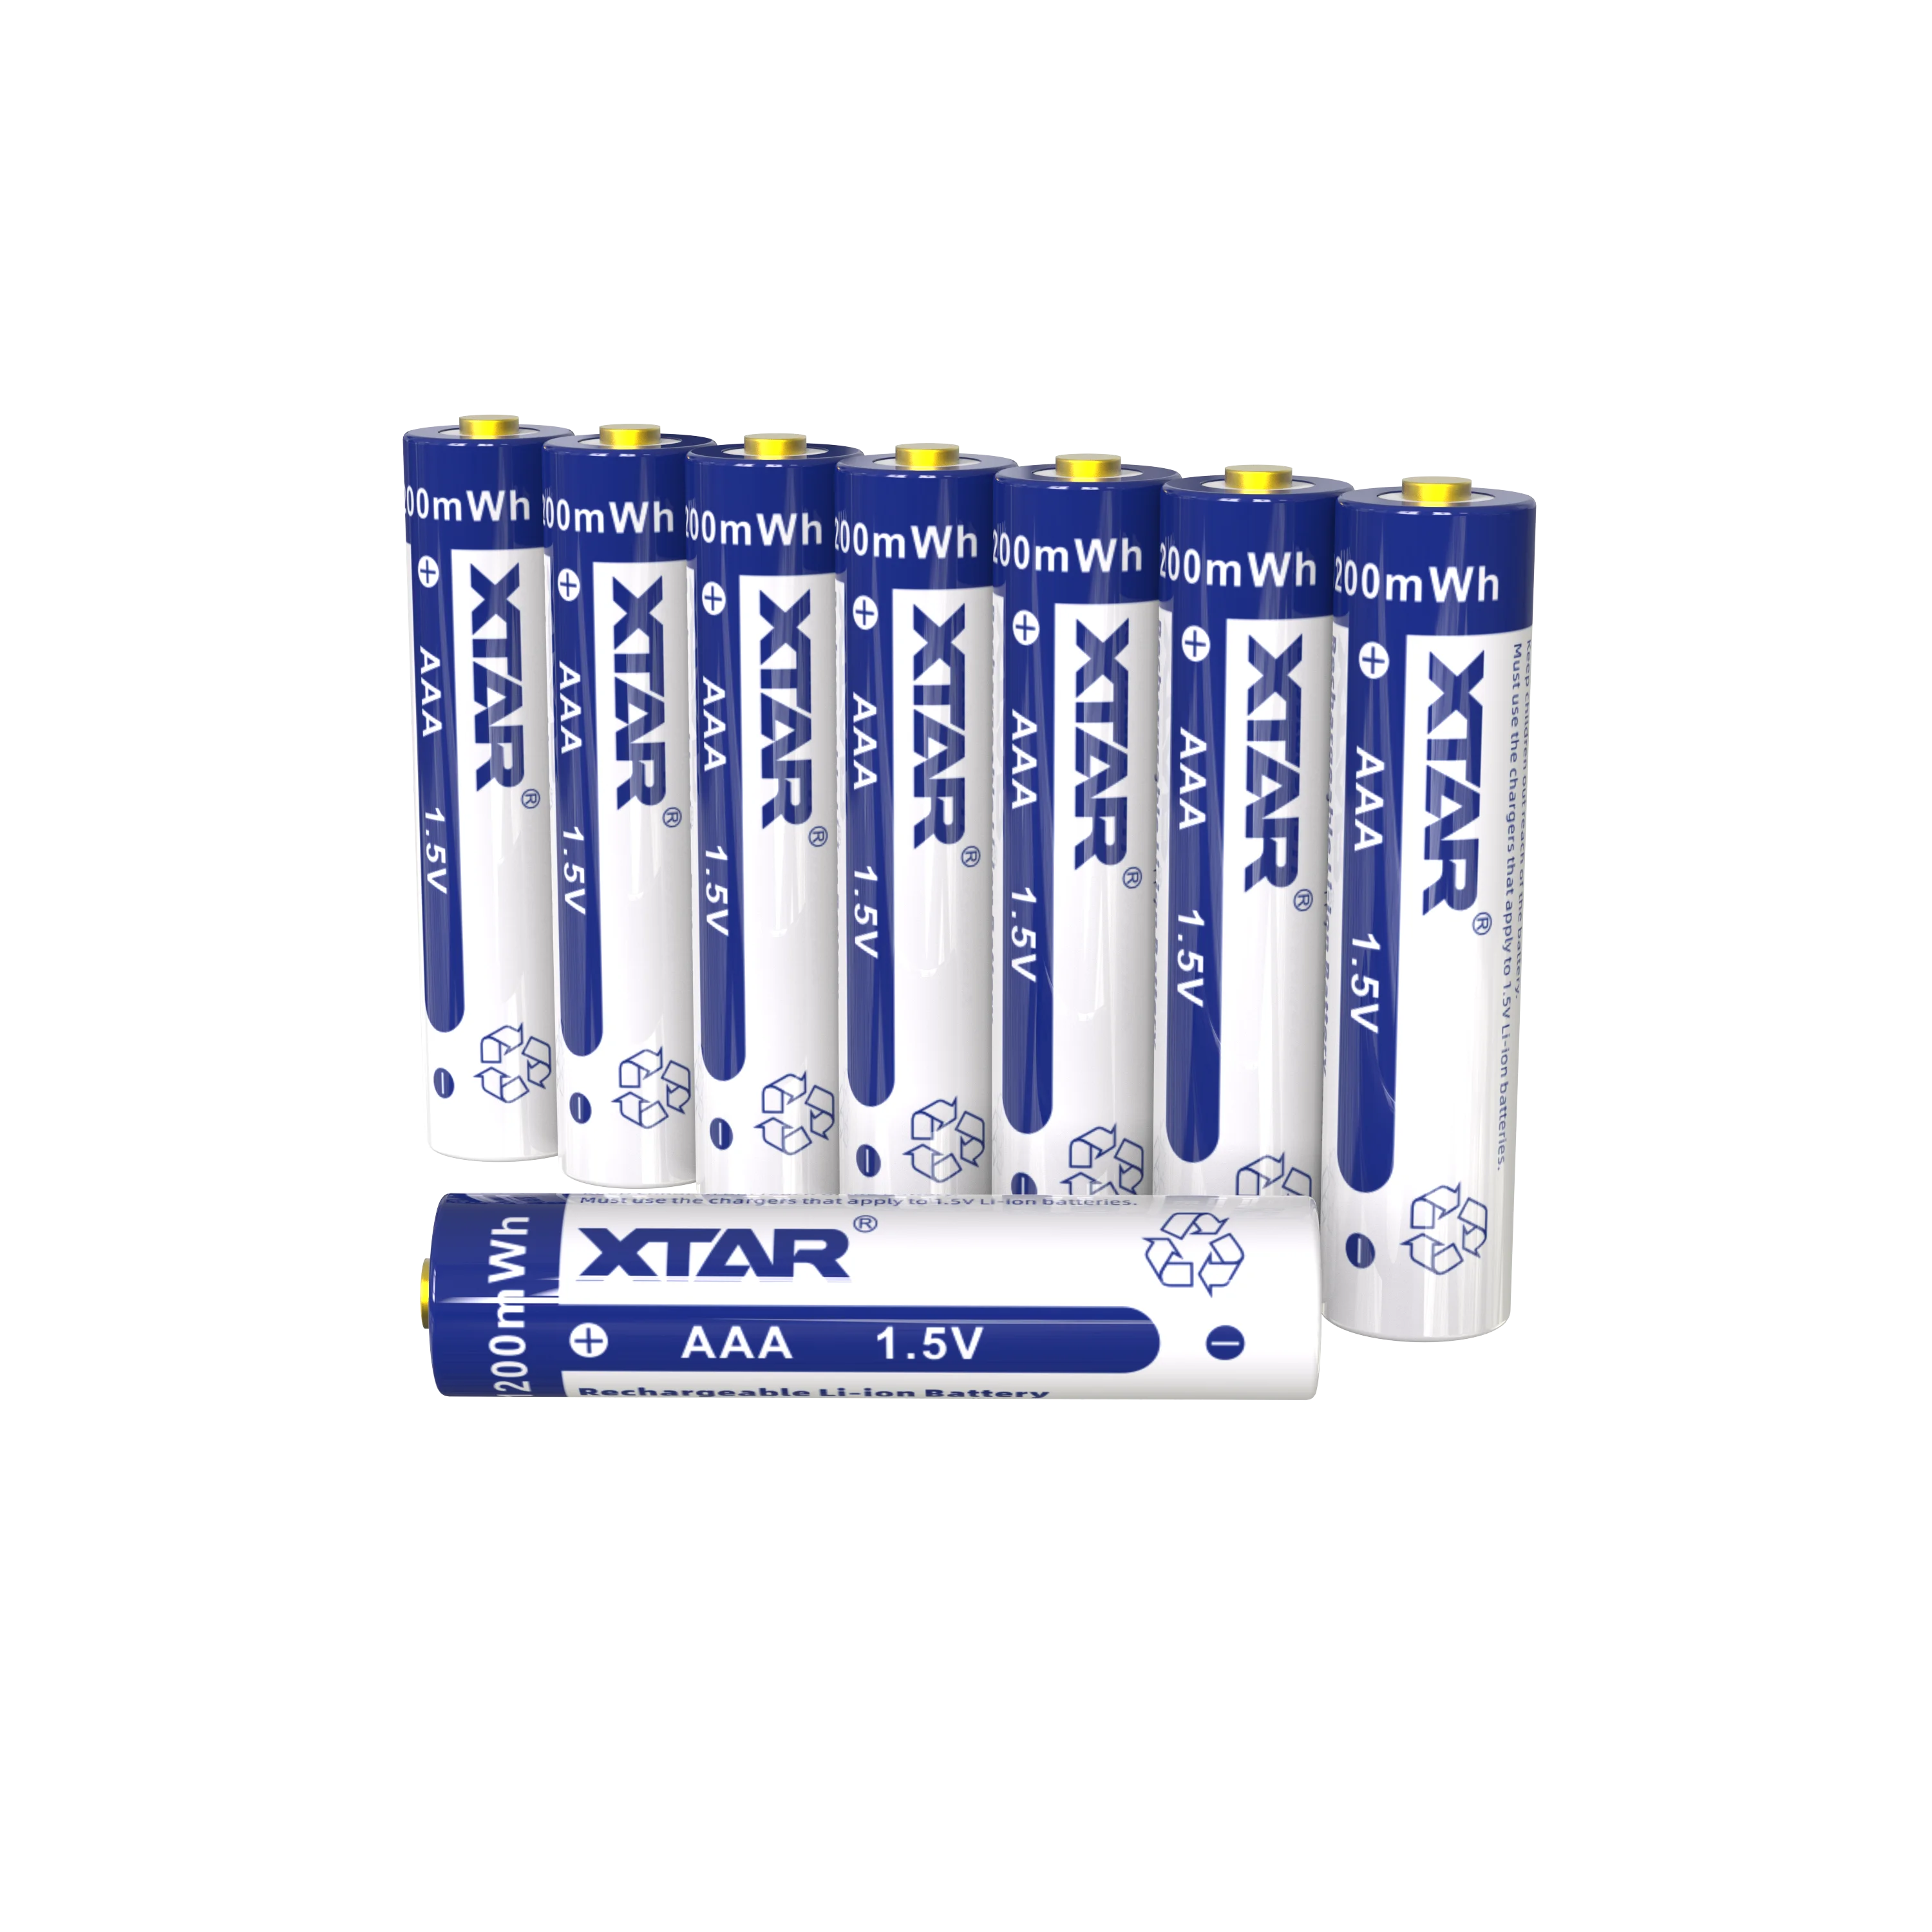 XTAR 1.5V AAA Battery 1200 mWh Rechargeable Li-ion Battery Max Discharge Current 1.5A Button Top Battery For Kids Toys